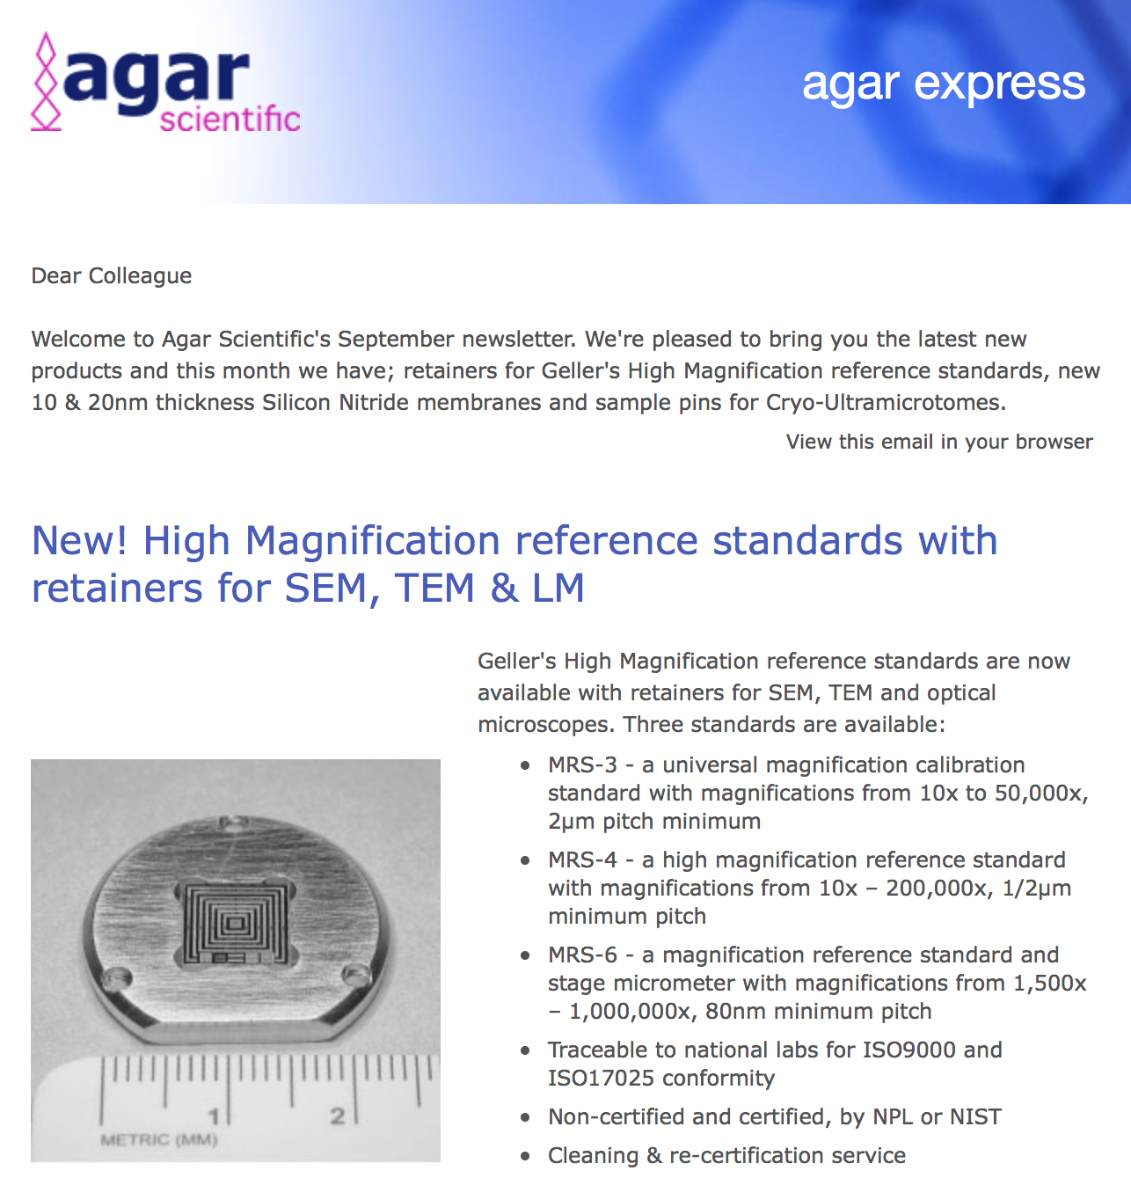 Agar Express September 2018 - new retainers for High Magnification EM reference standards, 10 & 20nm Silicon Nitride membranes & more…